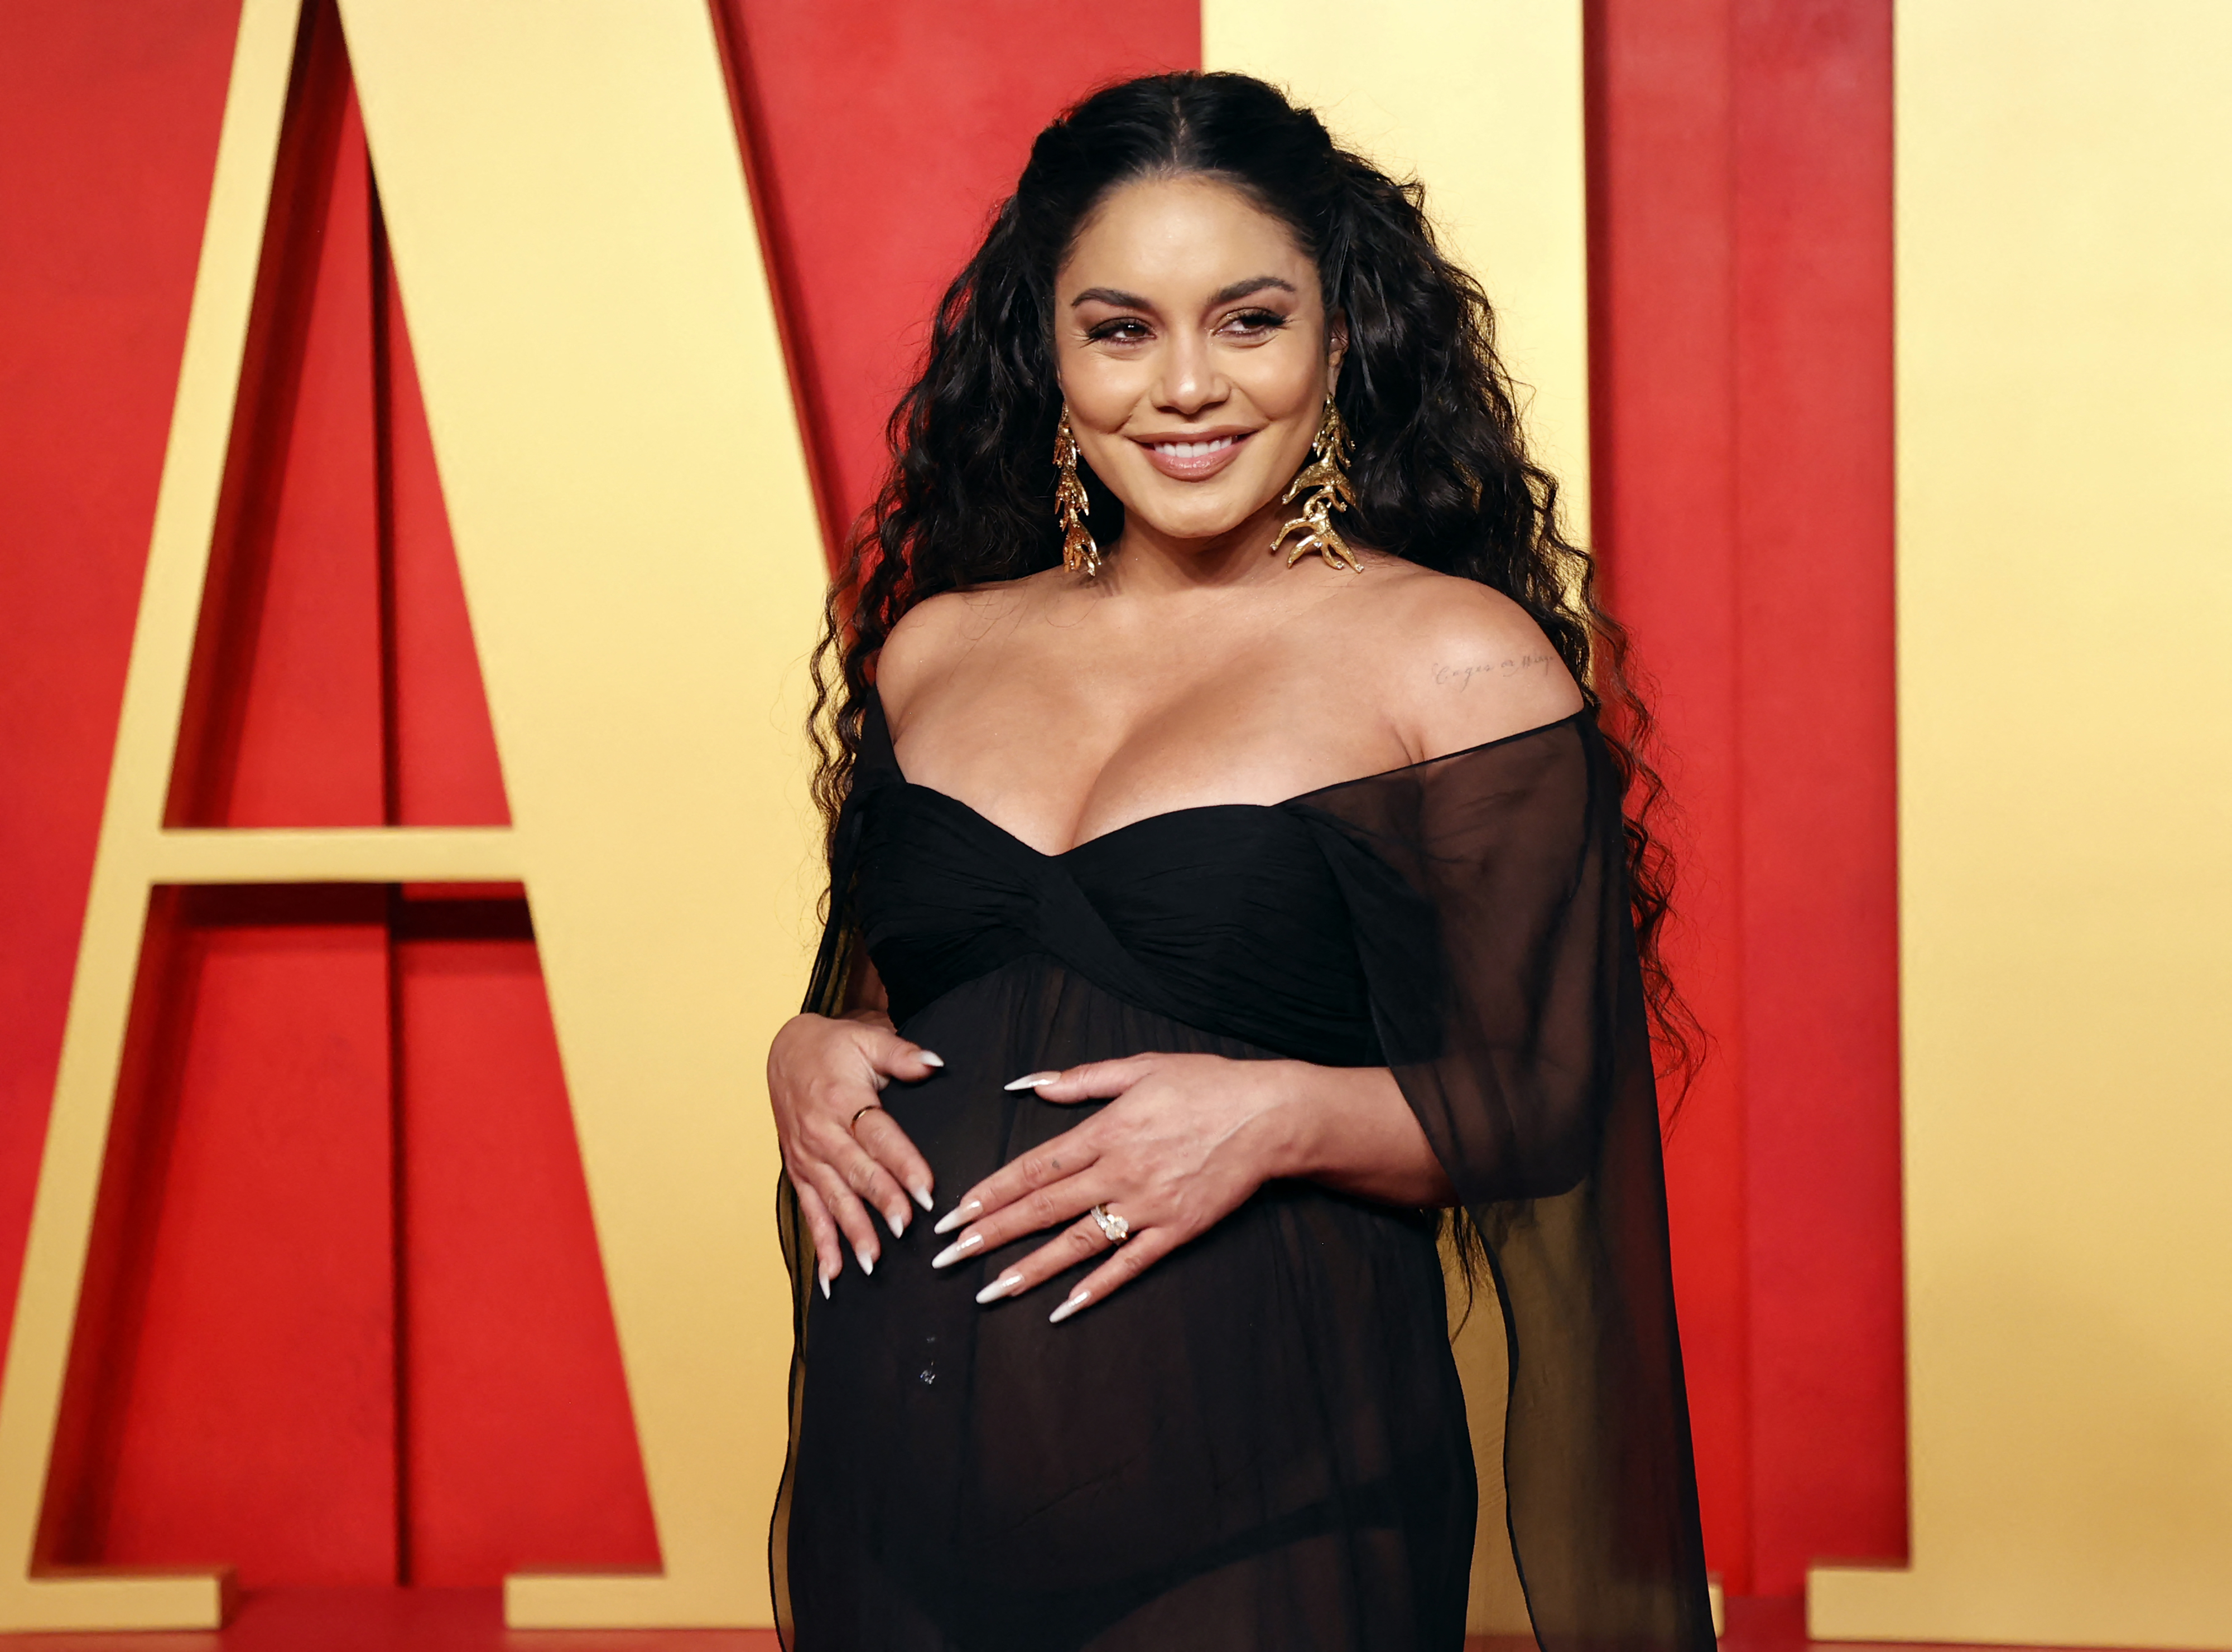 Vanessa poses on a red carpet wearing a sheer, off-the-shoulder dress, holding her baby bump and smiling at the camera